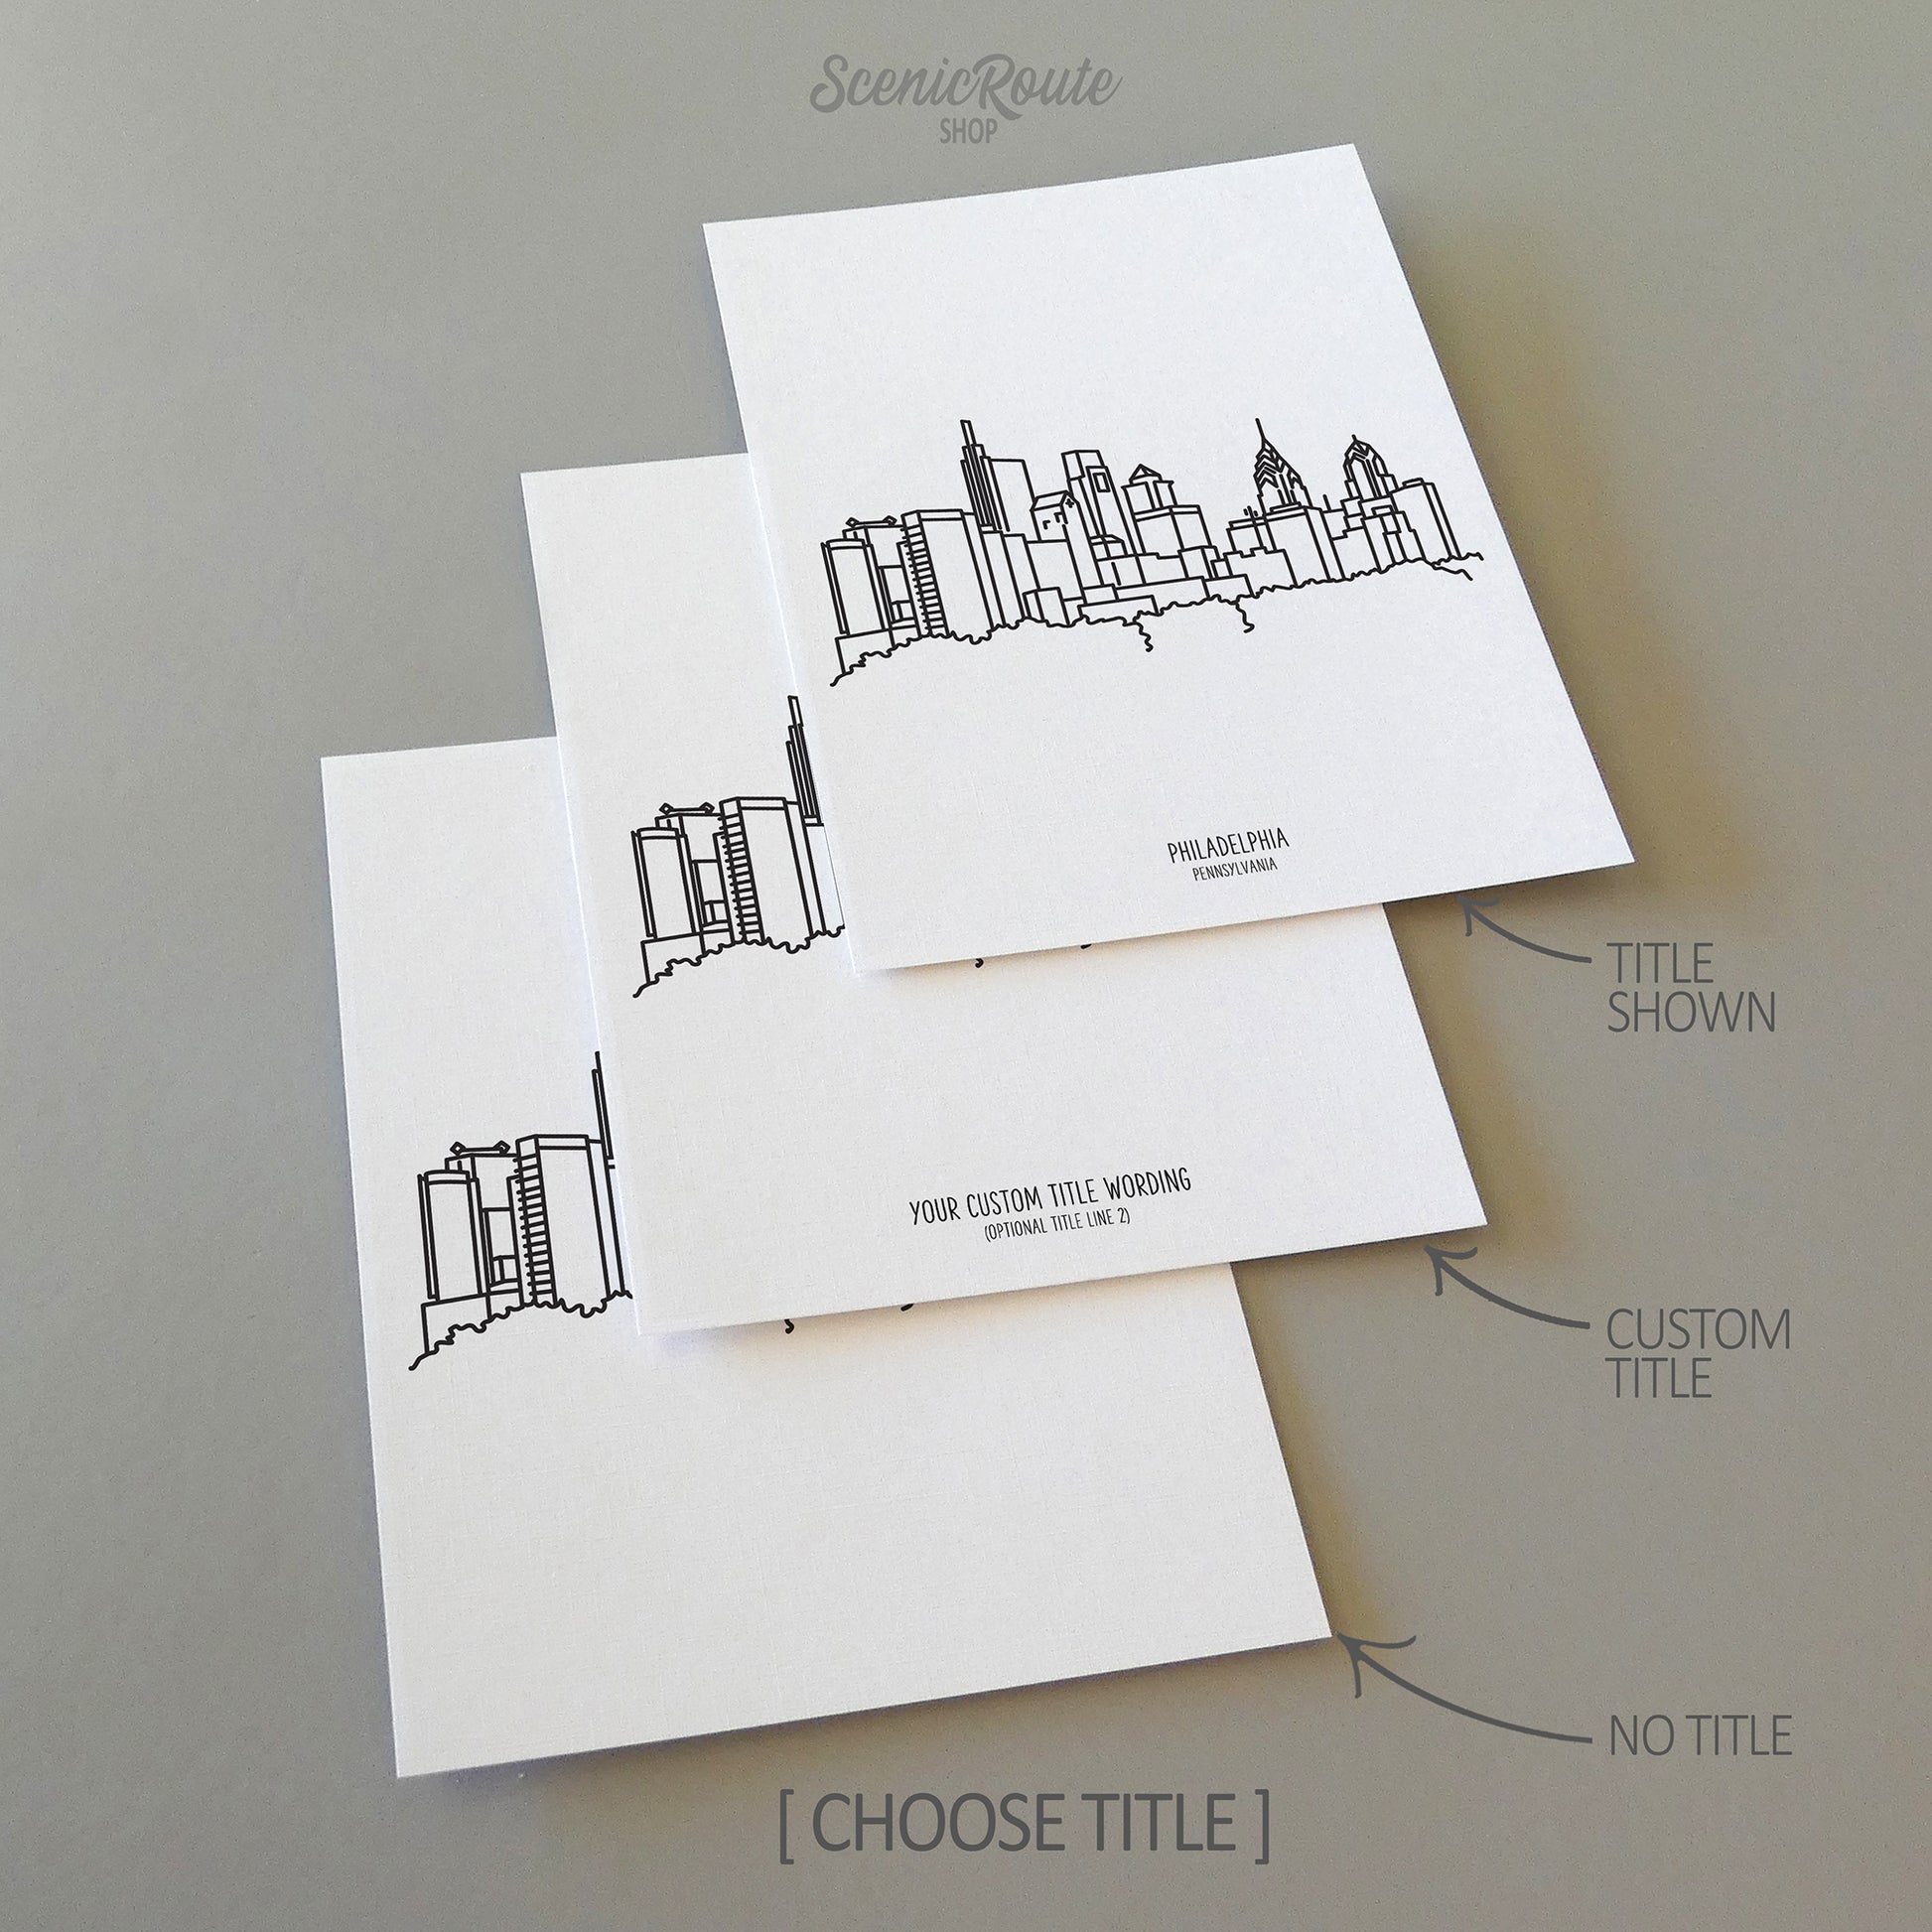 Three line art drawings of the Philadelphia Pennsylvania Skyline on white linen paper with a gray background. The pieces are shown with title options that can be chosen and personalized.